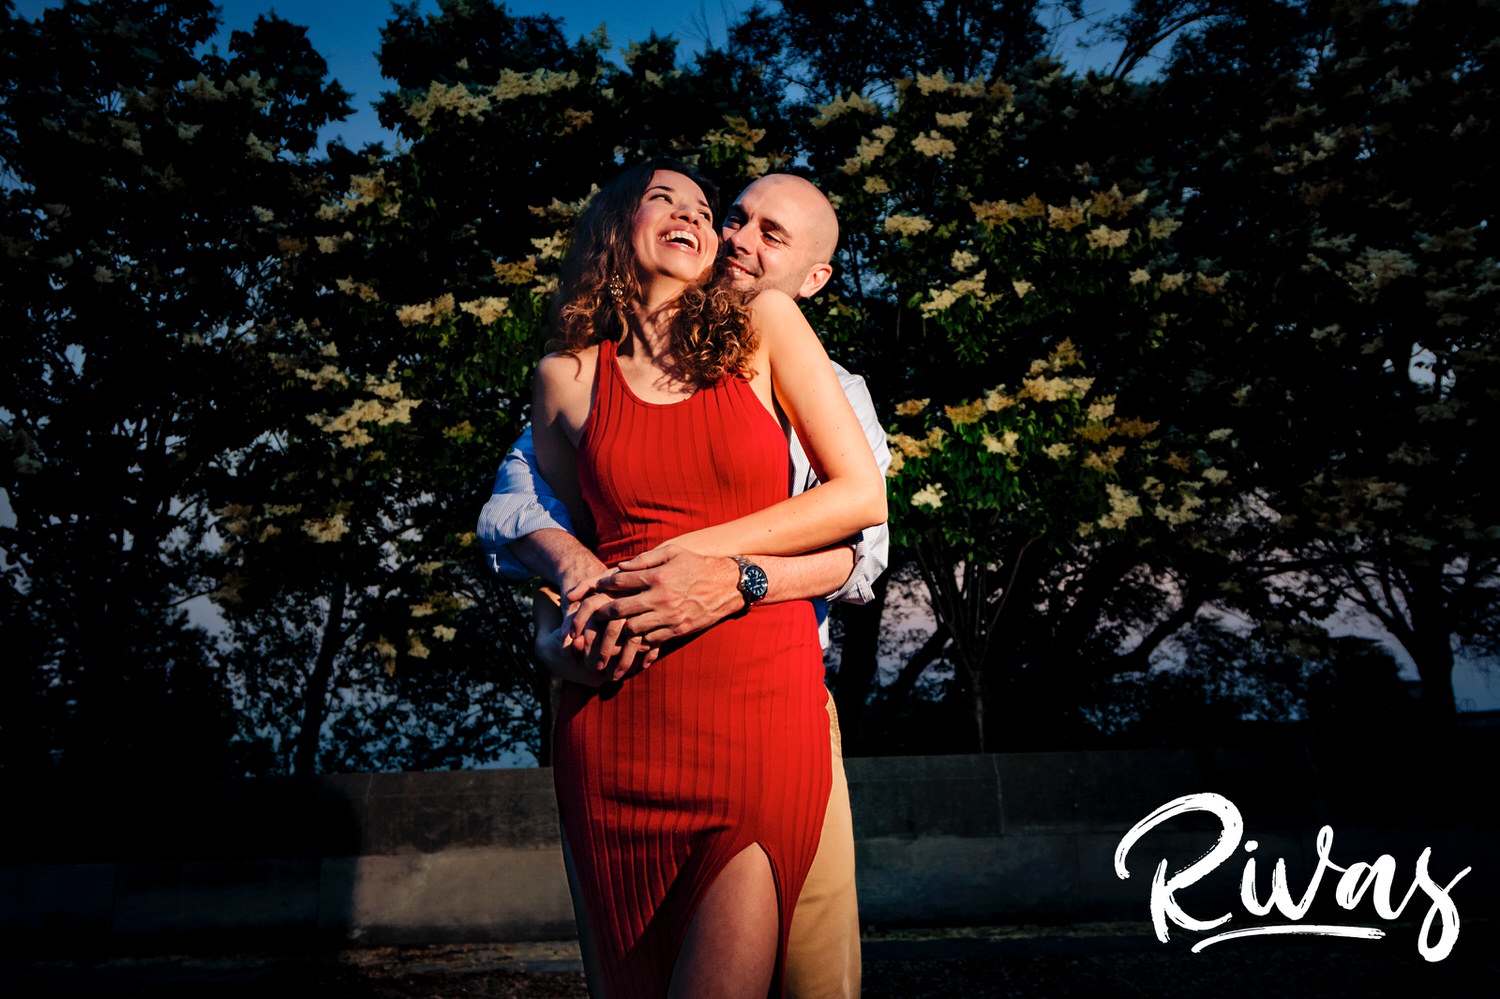 A fun, candid picture of a man holding a woman around the waist as they laugh together during their engagement session at Kansas City's Liberty Memorial. 